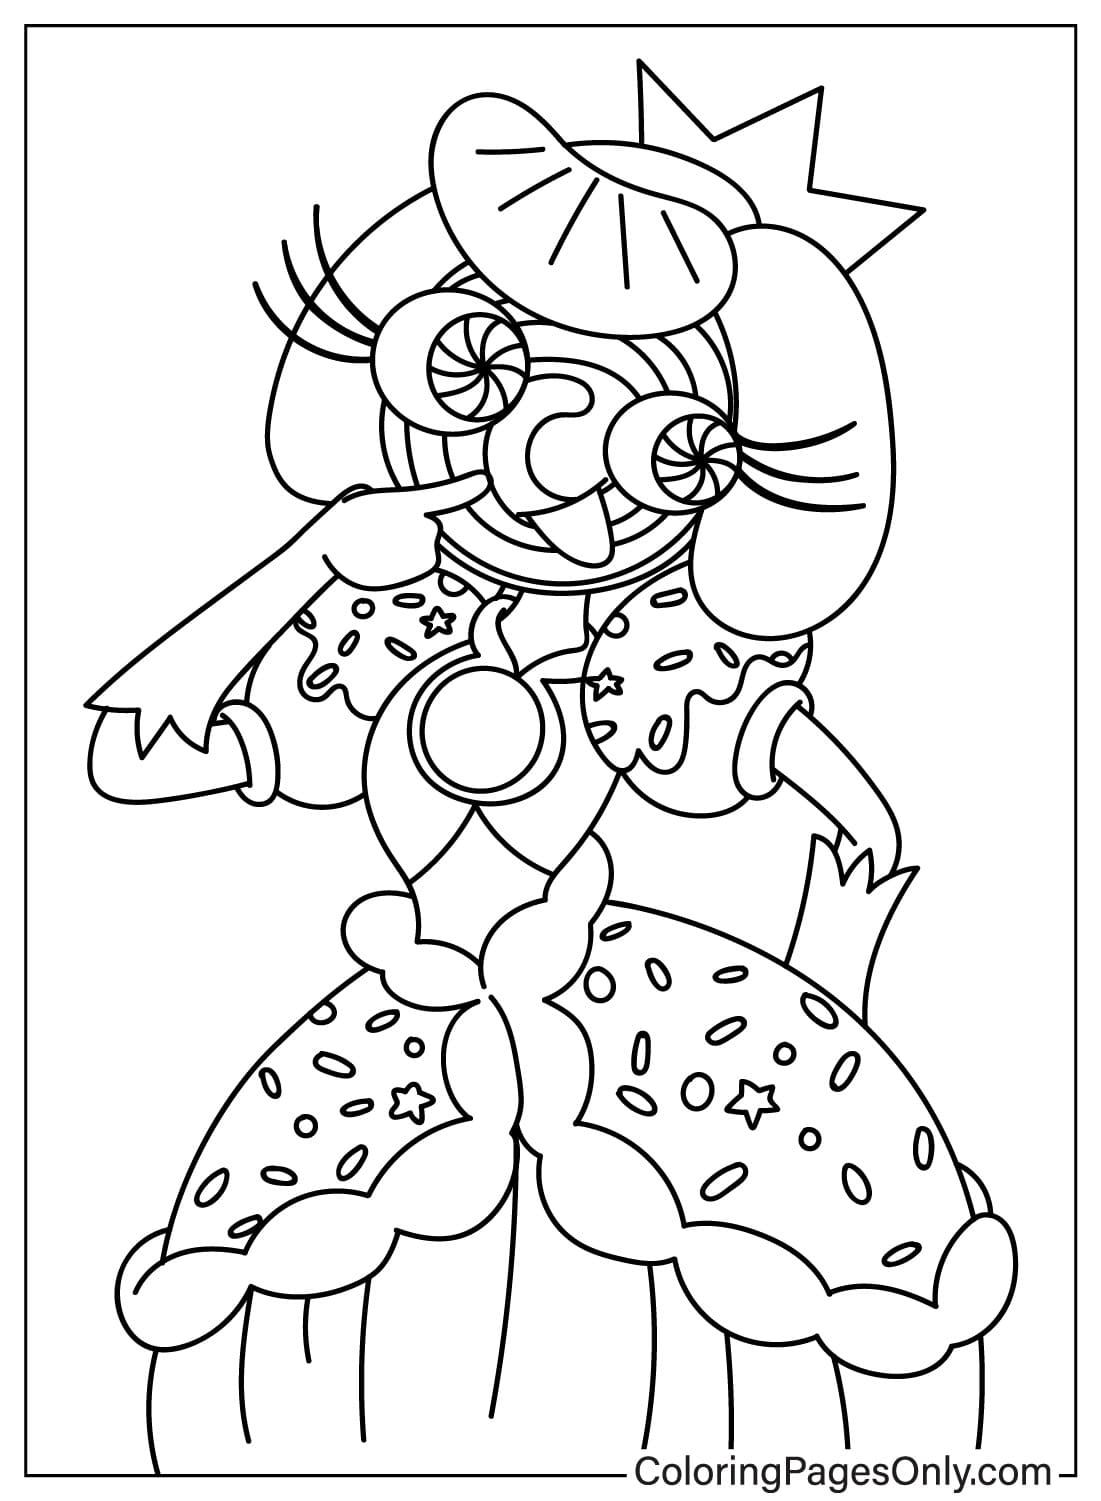 Princess Loolilalu Picture to Color from Princess Loolilalu